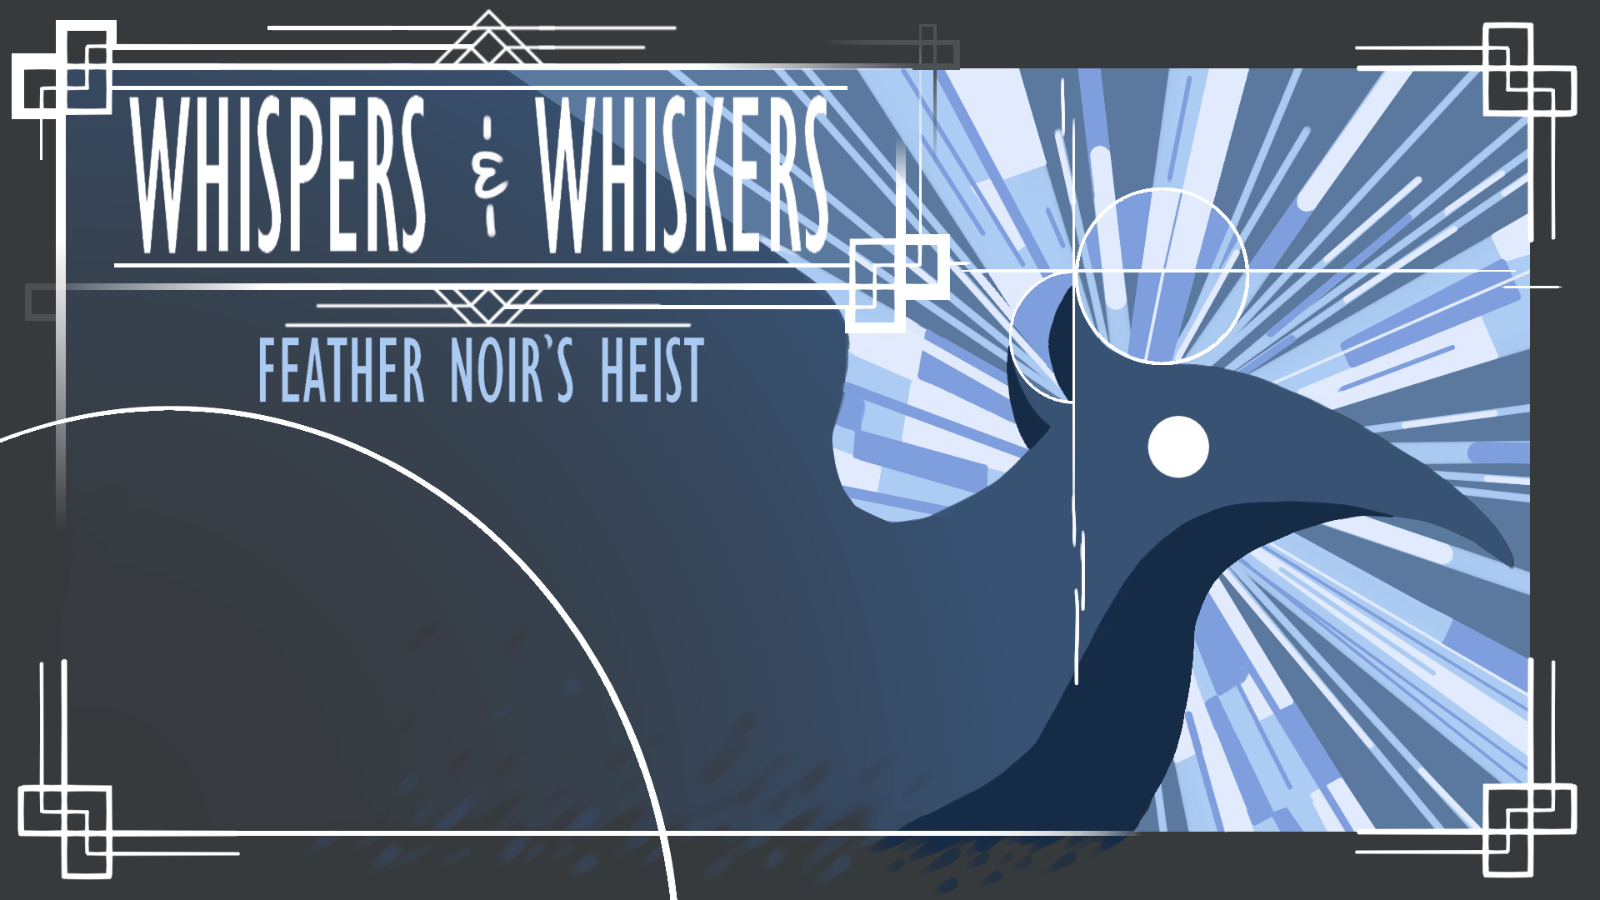 Whispers & Whiskers